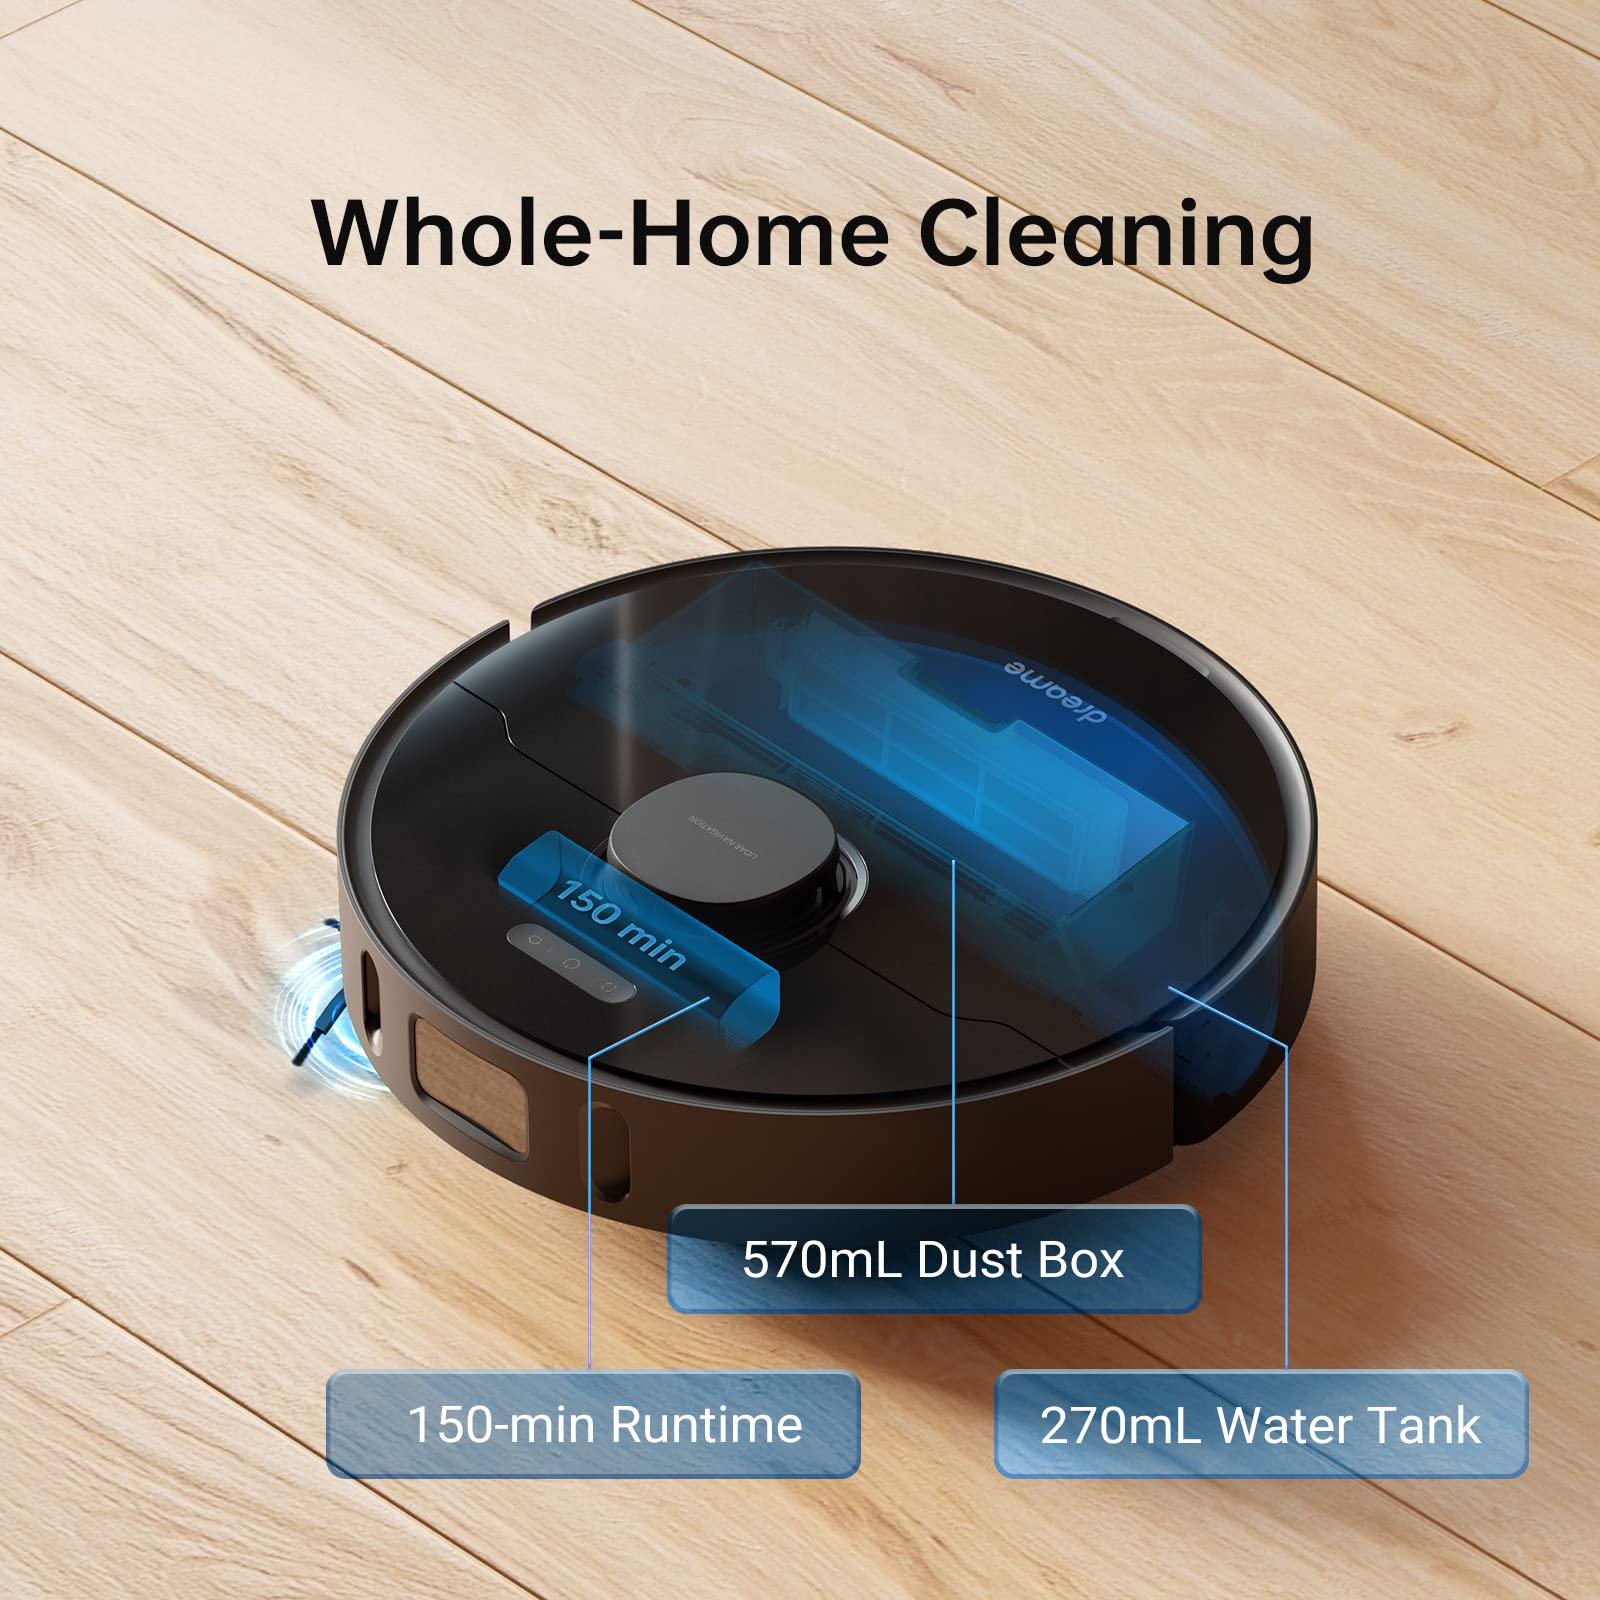 dreametech l10 pro robot vacuum and mop, 4000pa strong suction, 2.5h runtime, works with alexa/google home/app, 3d obstacle a